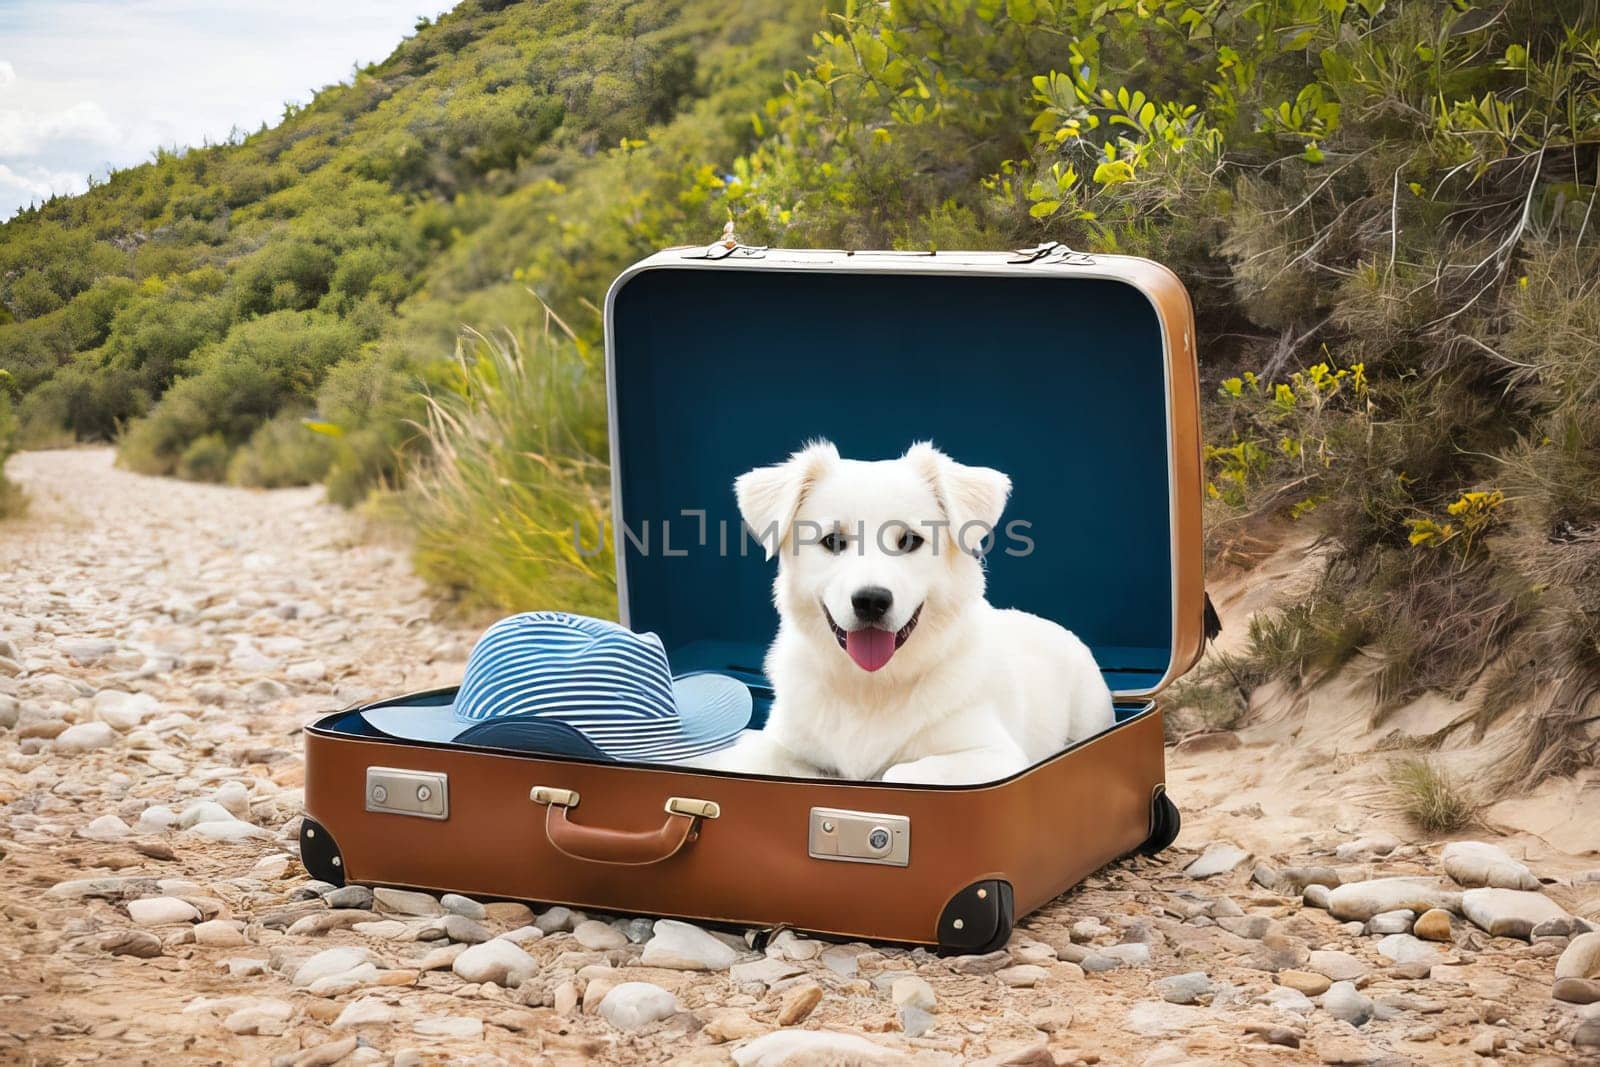 A curious dog perched on an open suitcase, ready for adventure during a vacation getaway